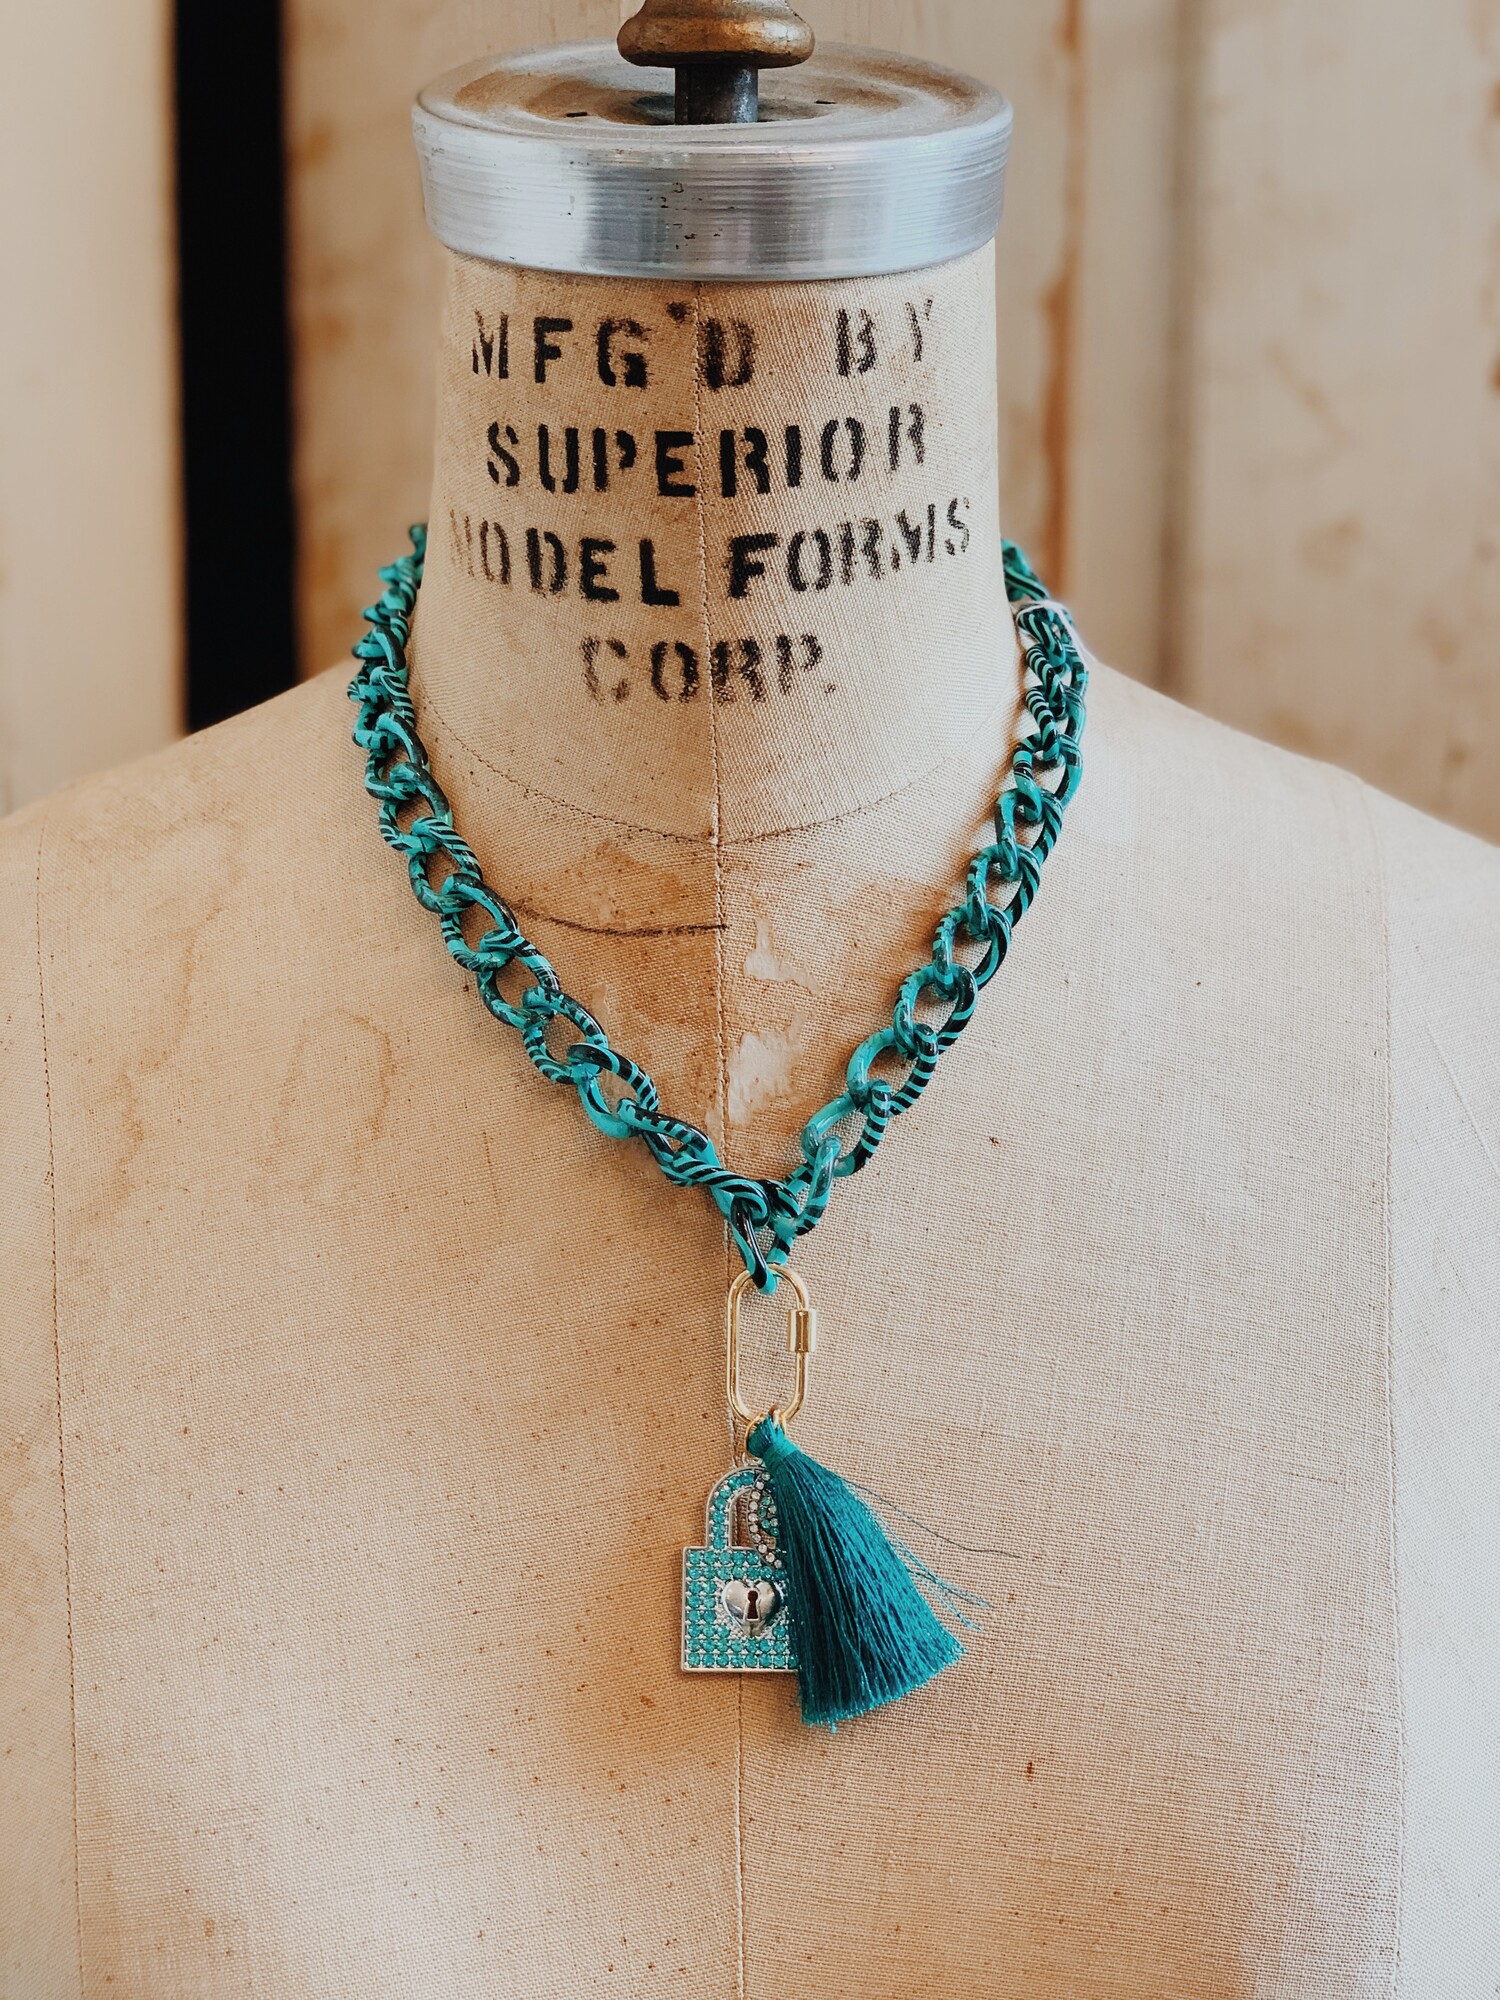 This Kelli Hawk Designs necklace is so fun and makes a statement! It is on a 17 inch turquoise and black chain with a 3 inch extender. A teal tassel and blue rhinestoned lock hang from this chain.